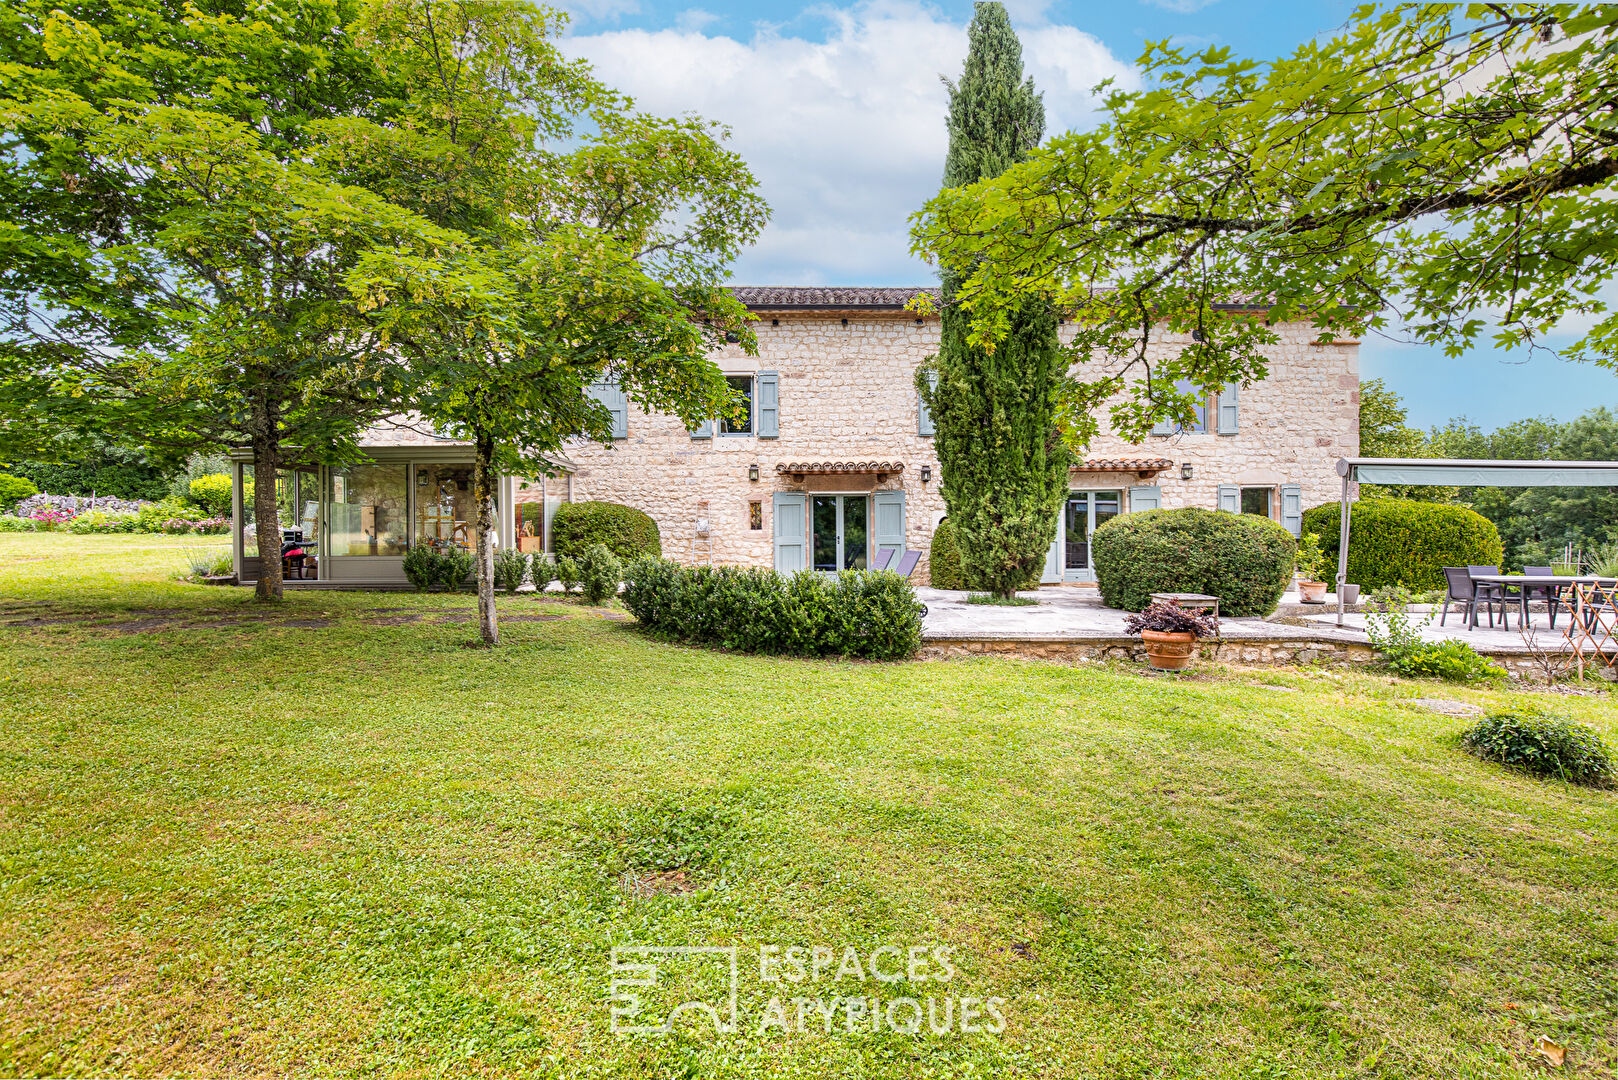 Exceptional 17th century estate with large wooded park in Gaillac